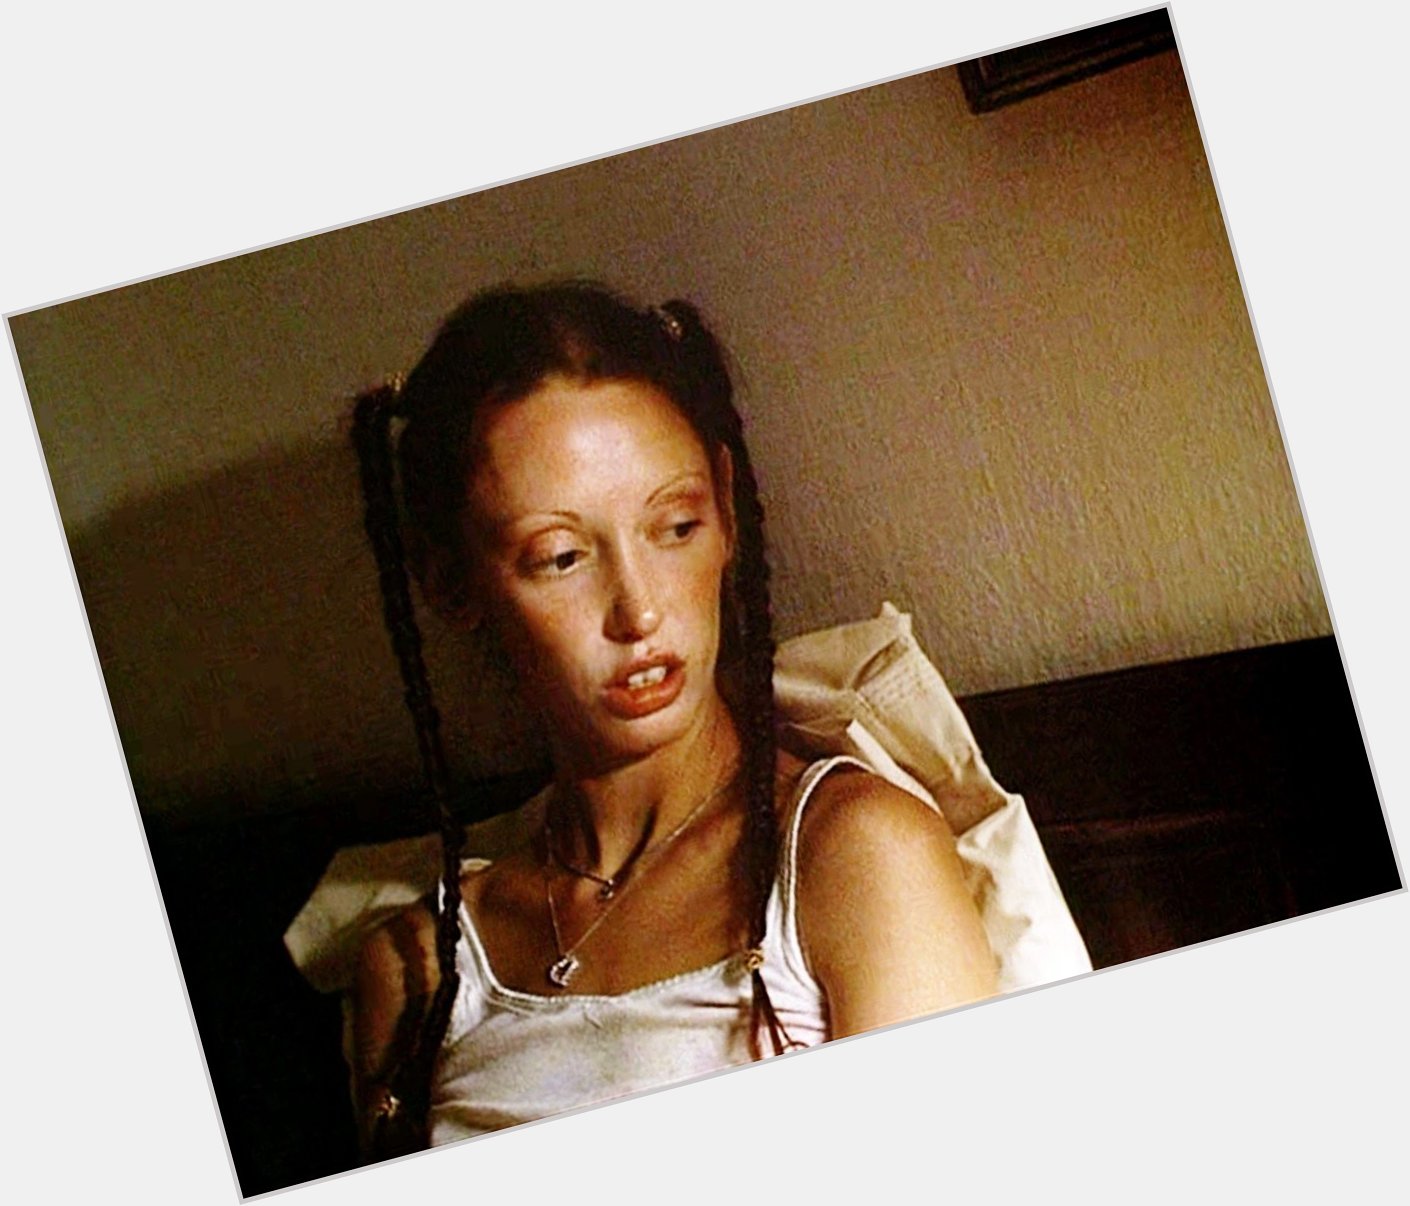 Happy Birthday to Shelley Duvall, here in ANNIE HALL! 